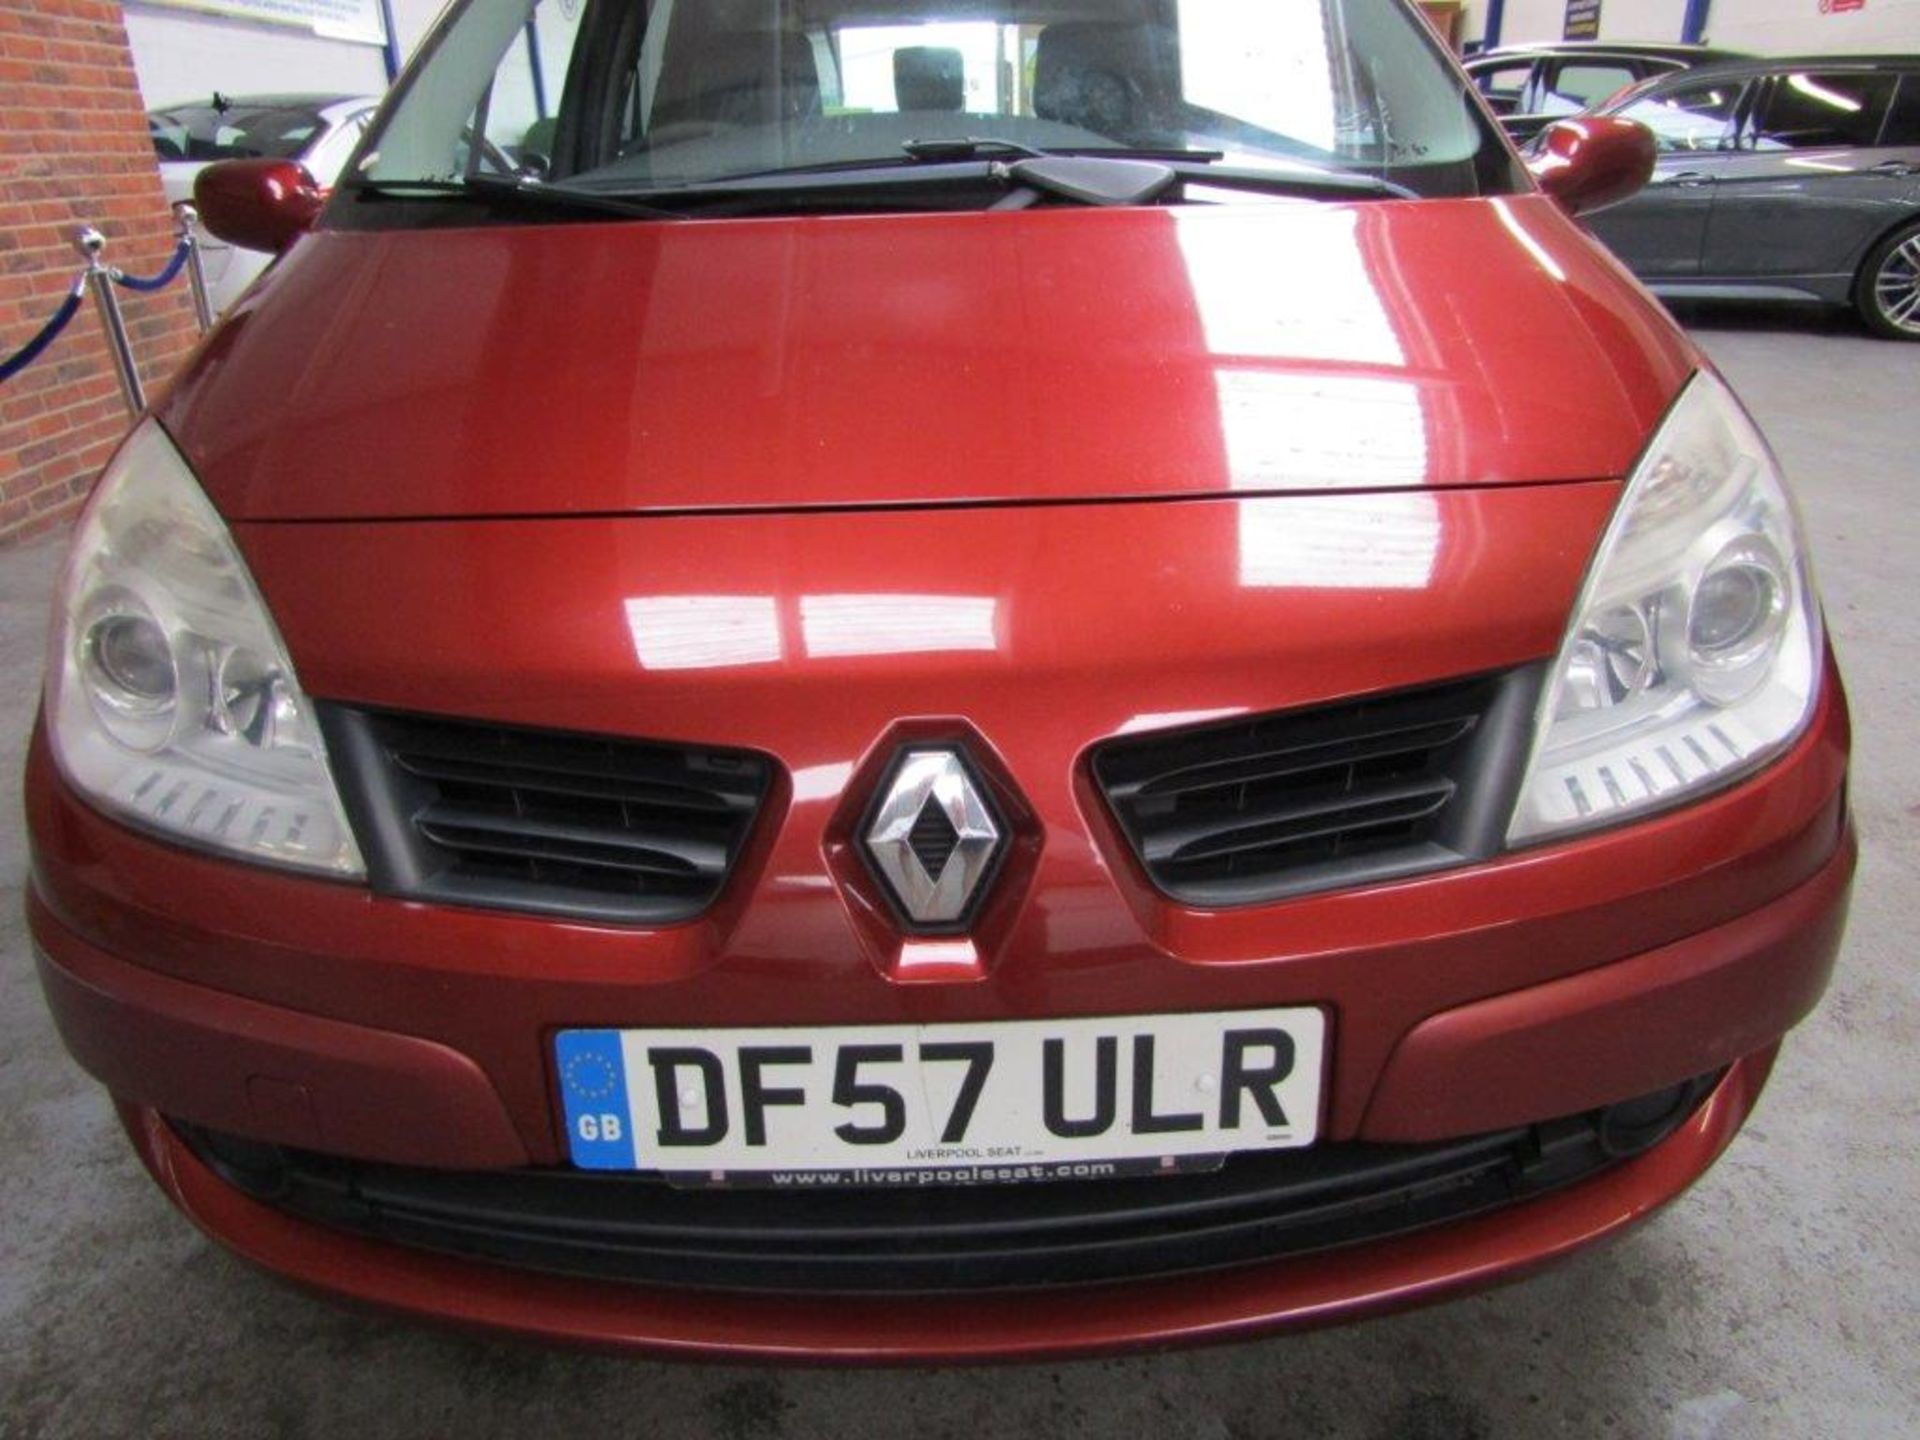 57 08 Renault Scenic Extreme VVT - Image 14 of 20